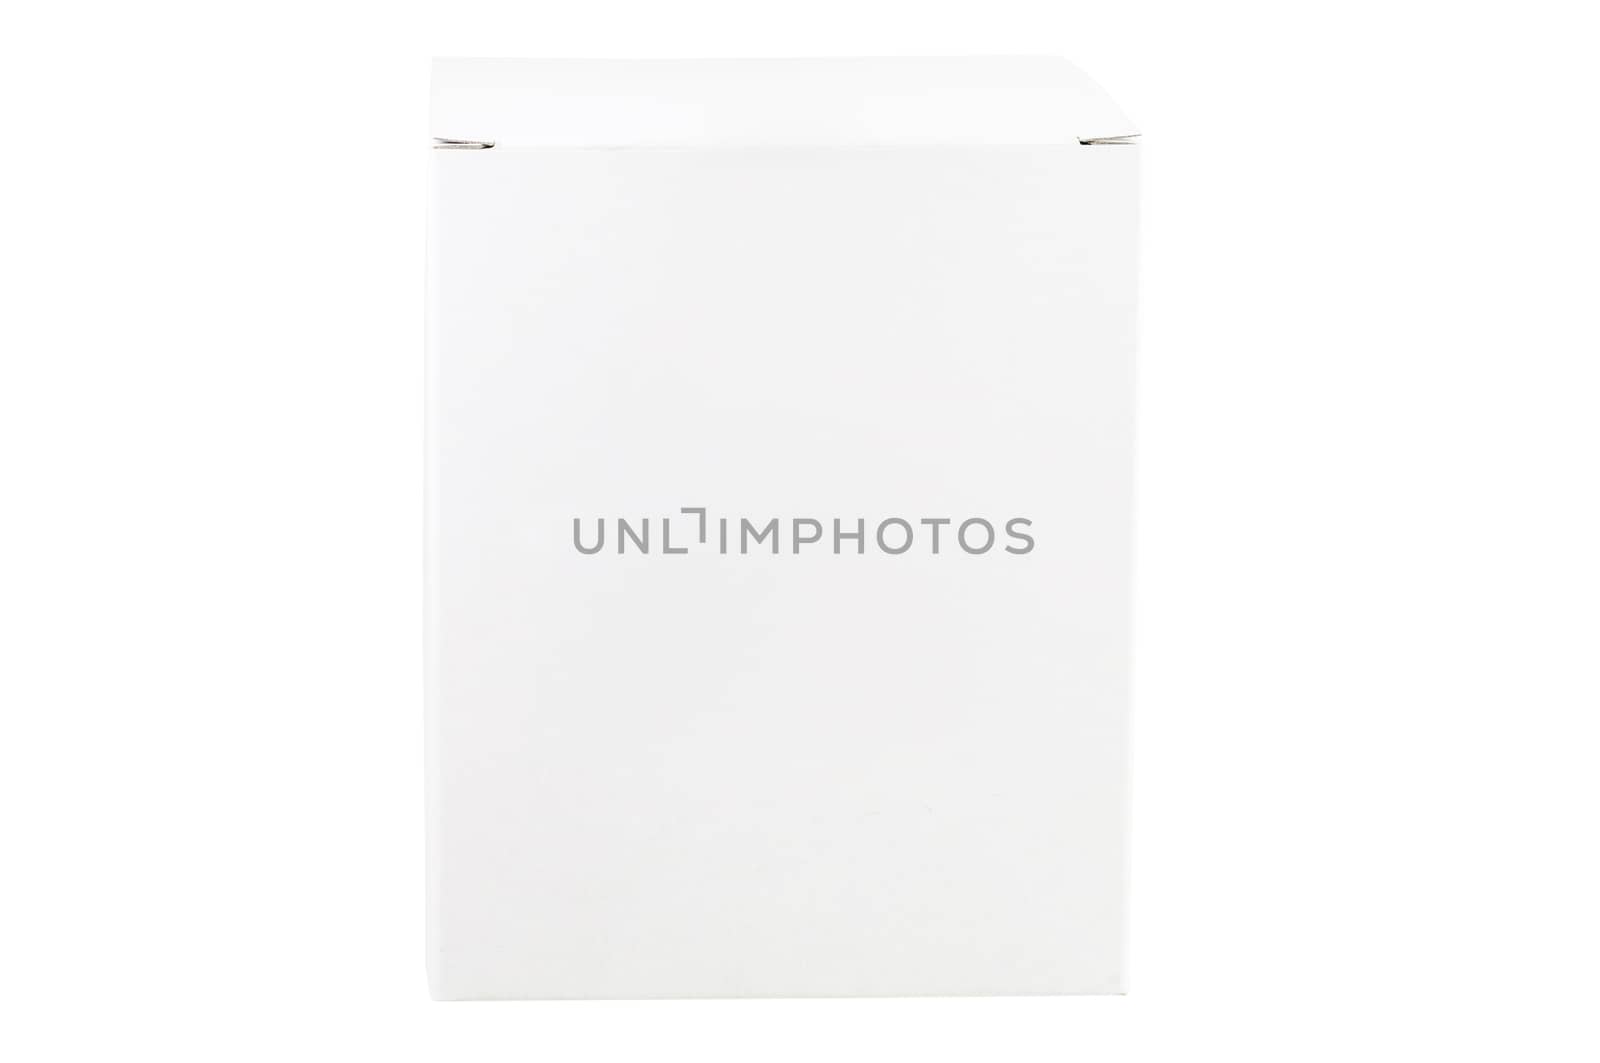 White box isolated on white background with clipping path 